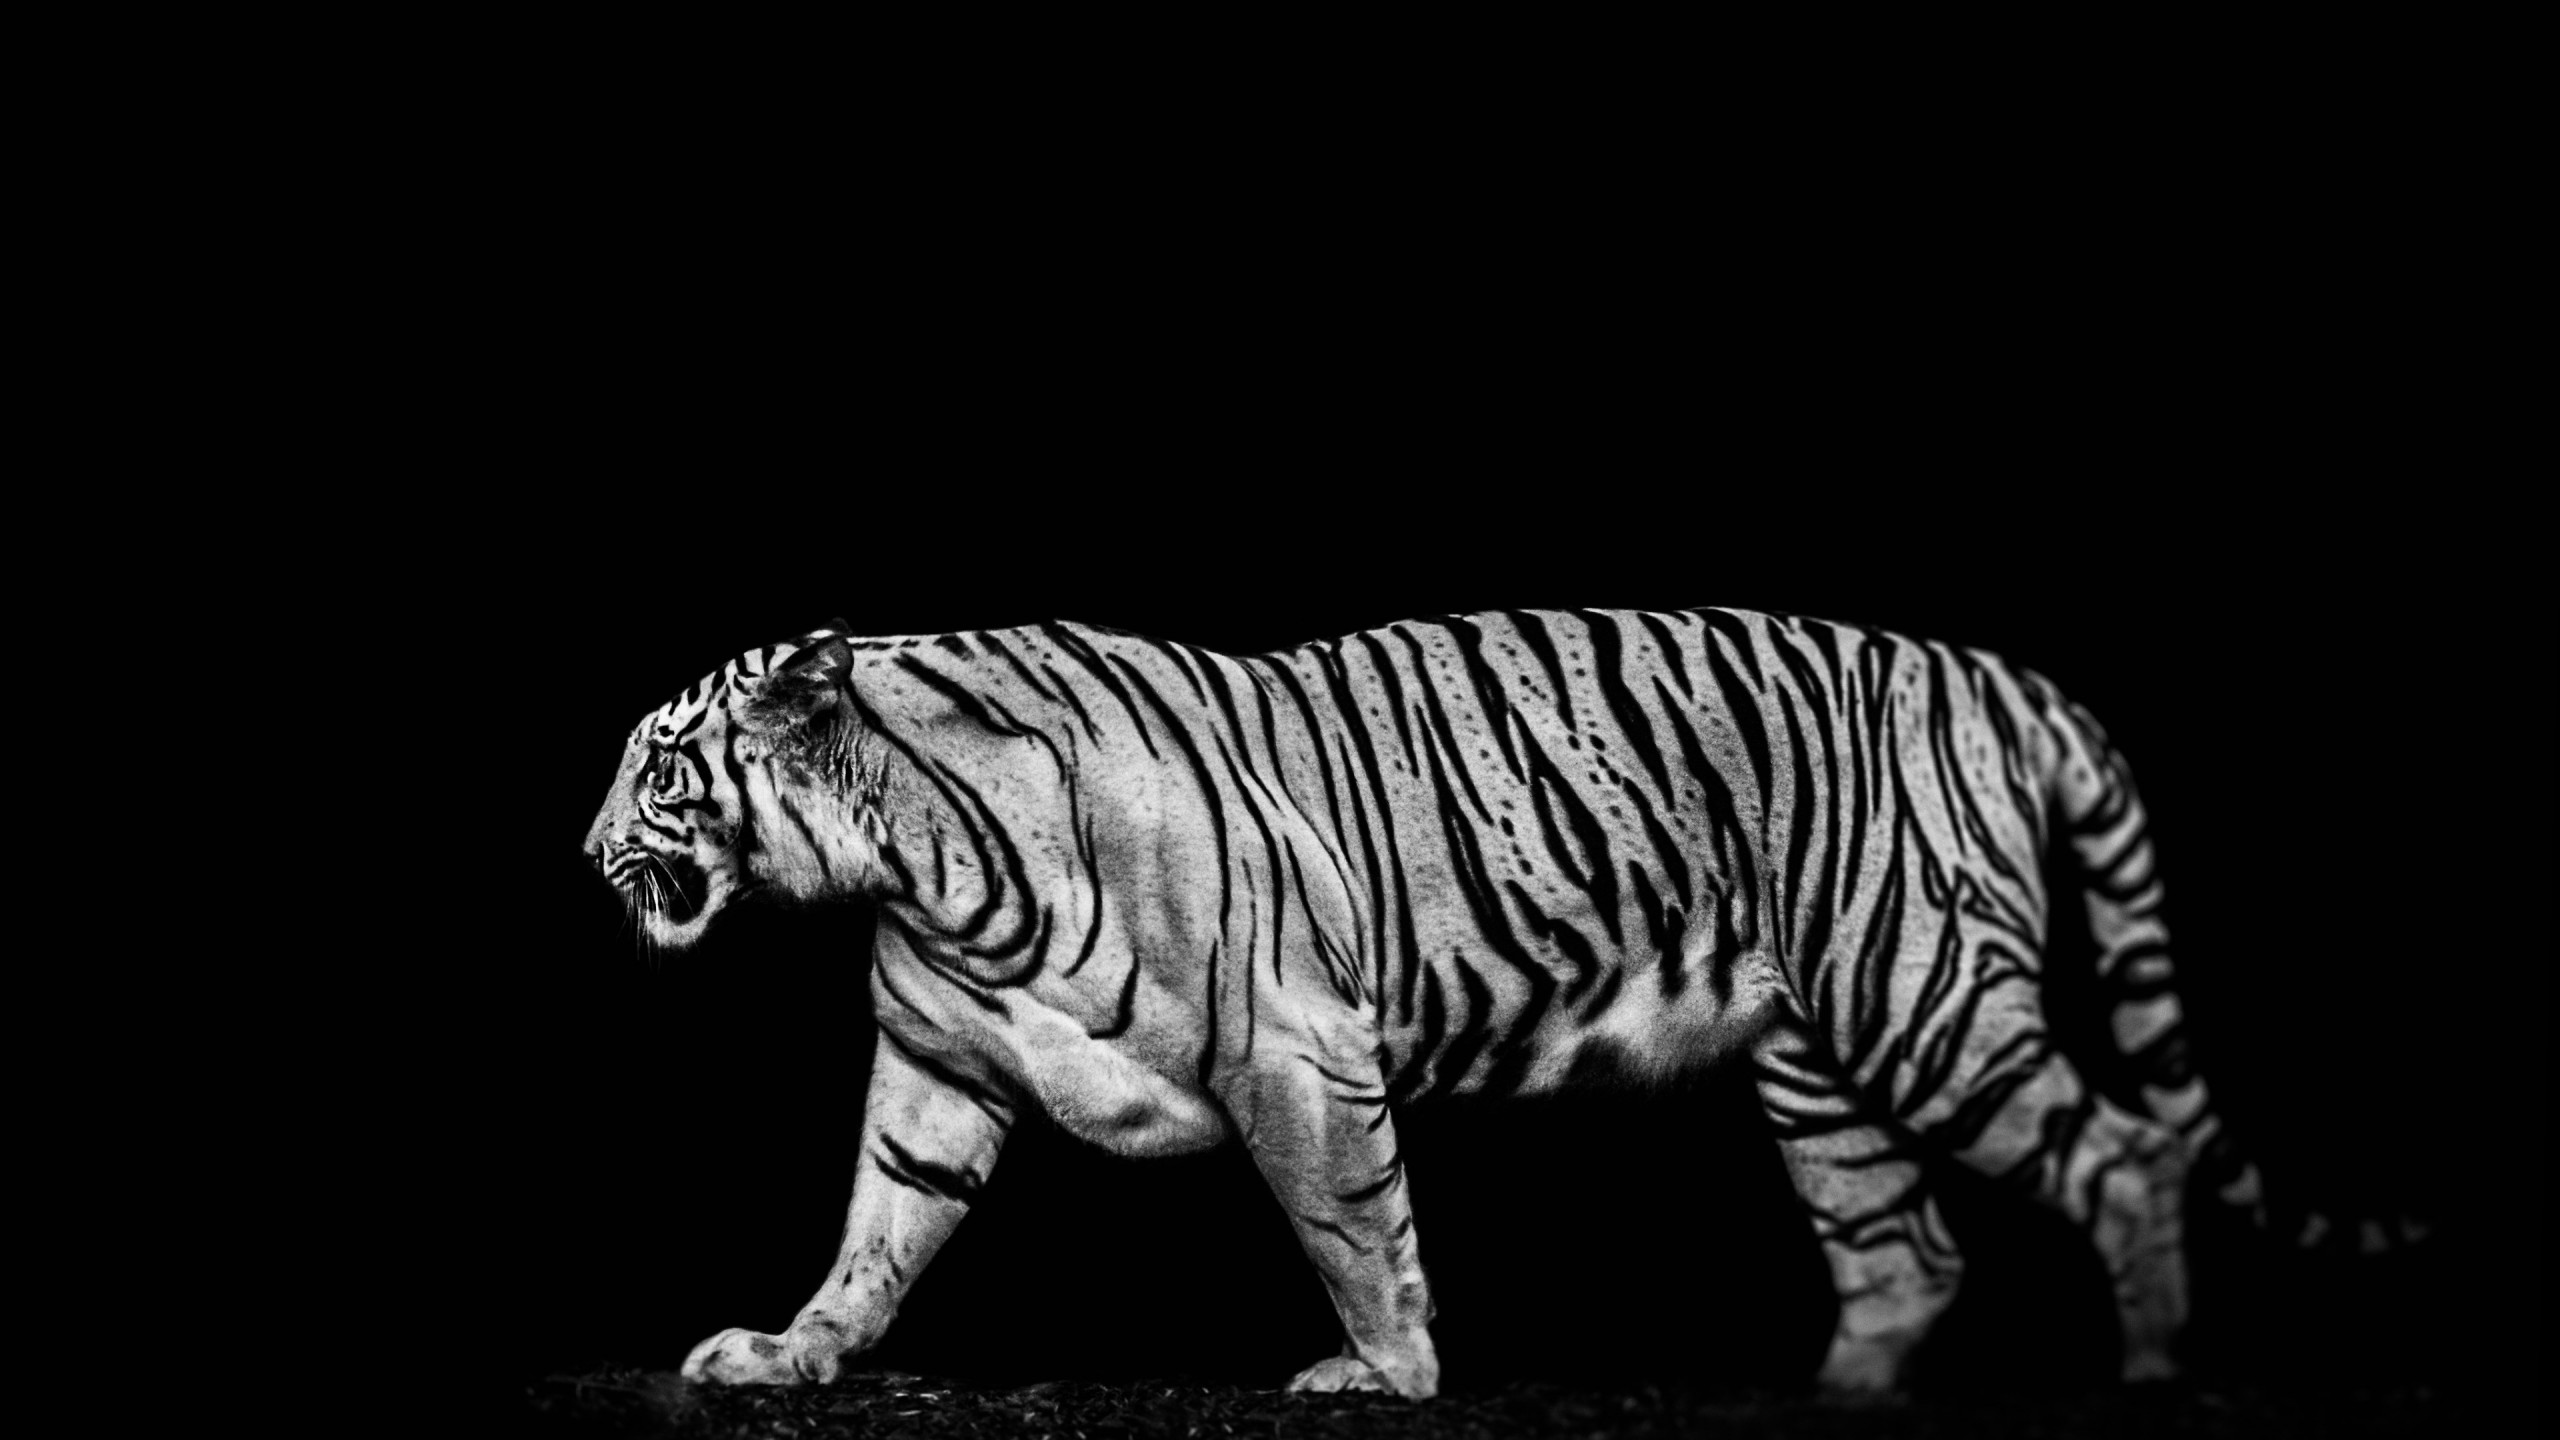 Tiger in the darkness wallpaper 2560x1440